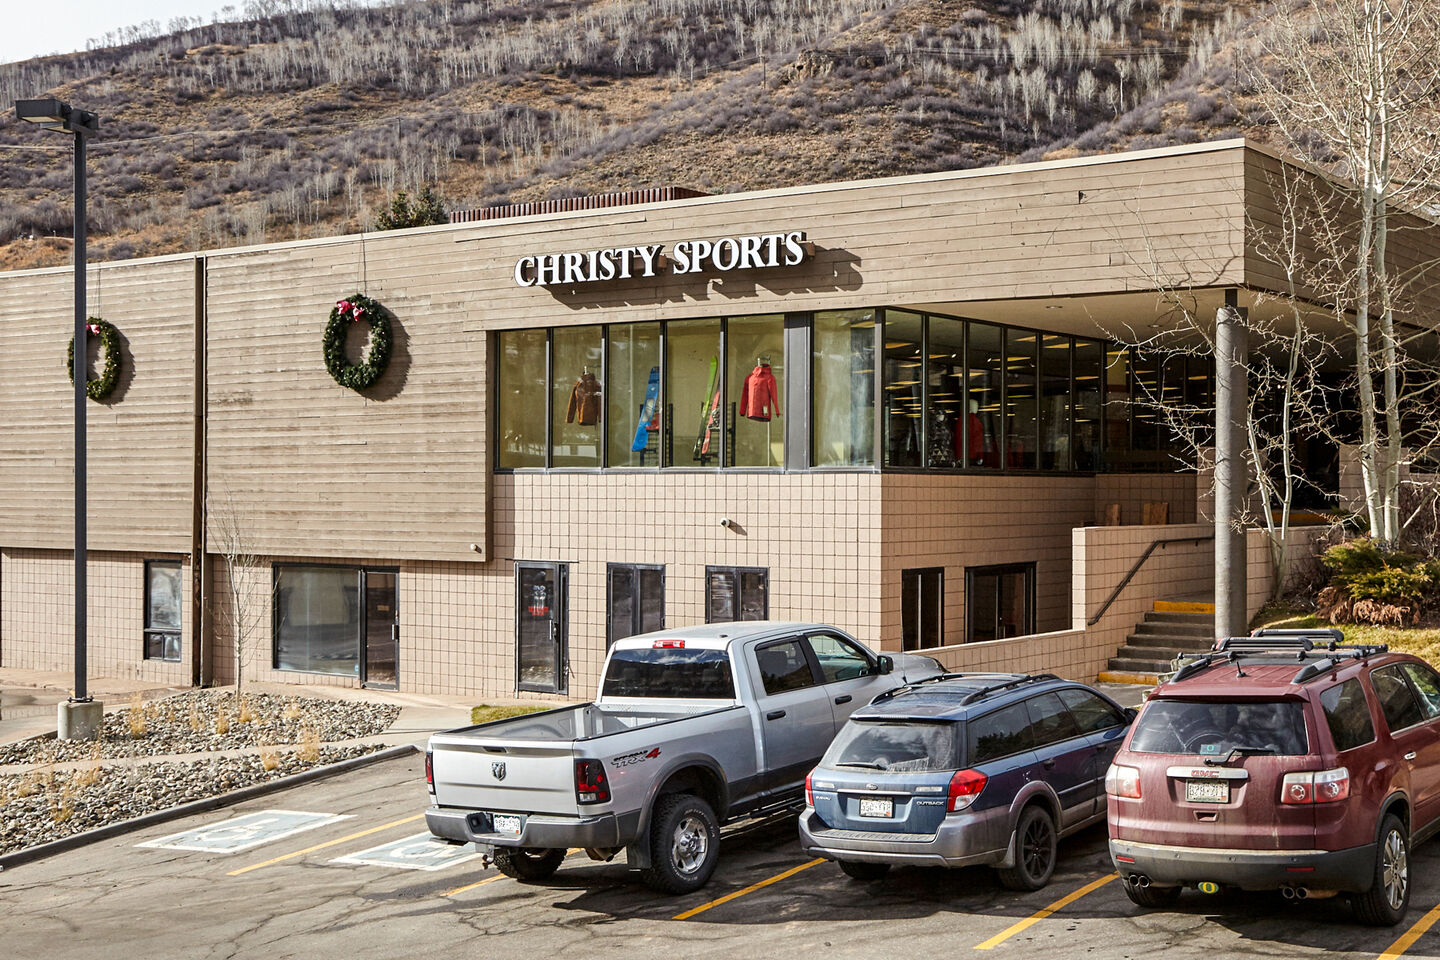 christy sports west vail location